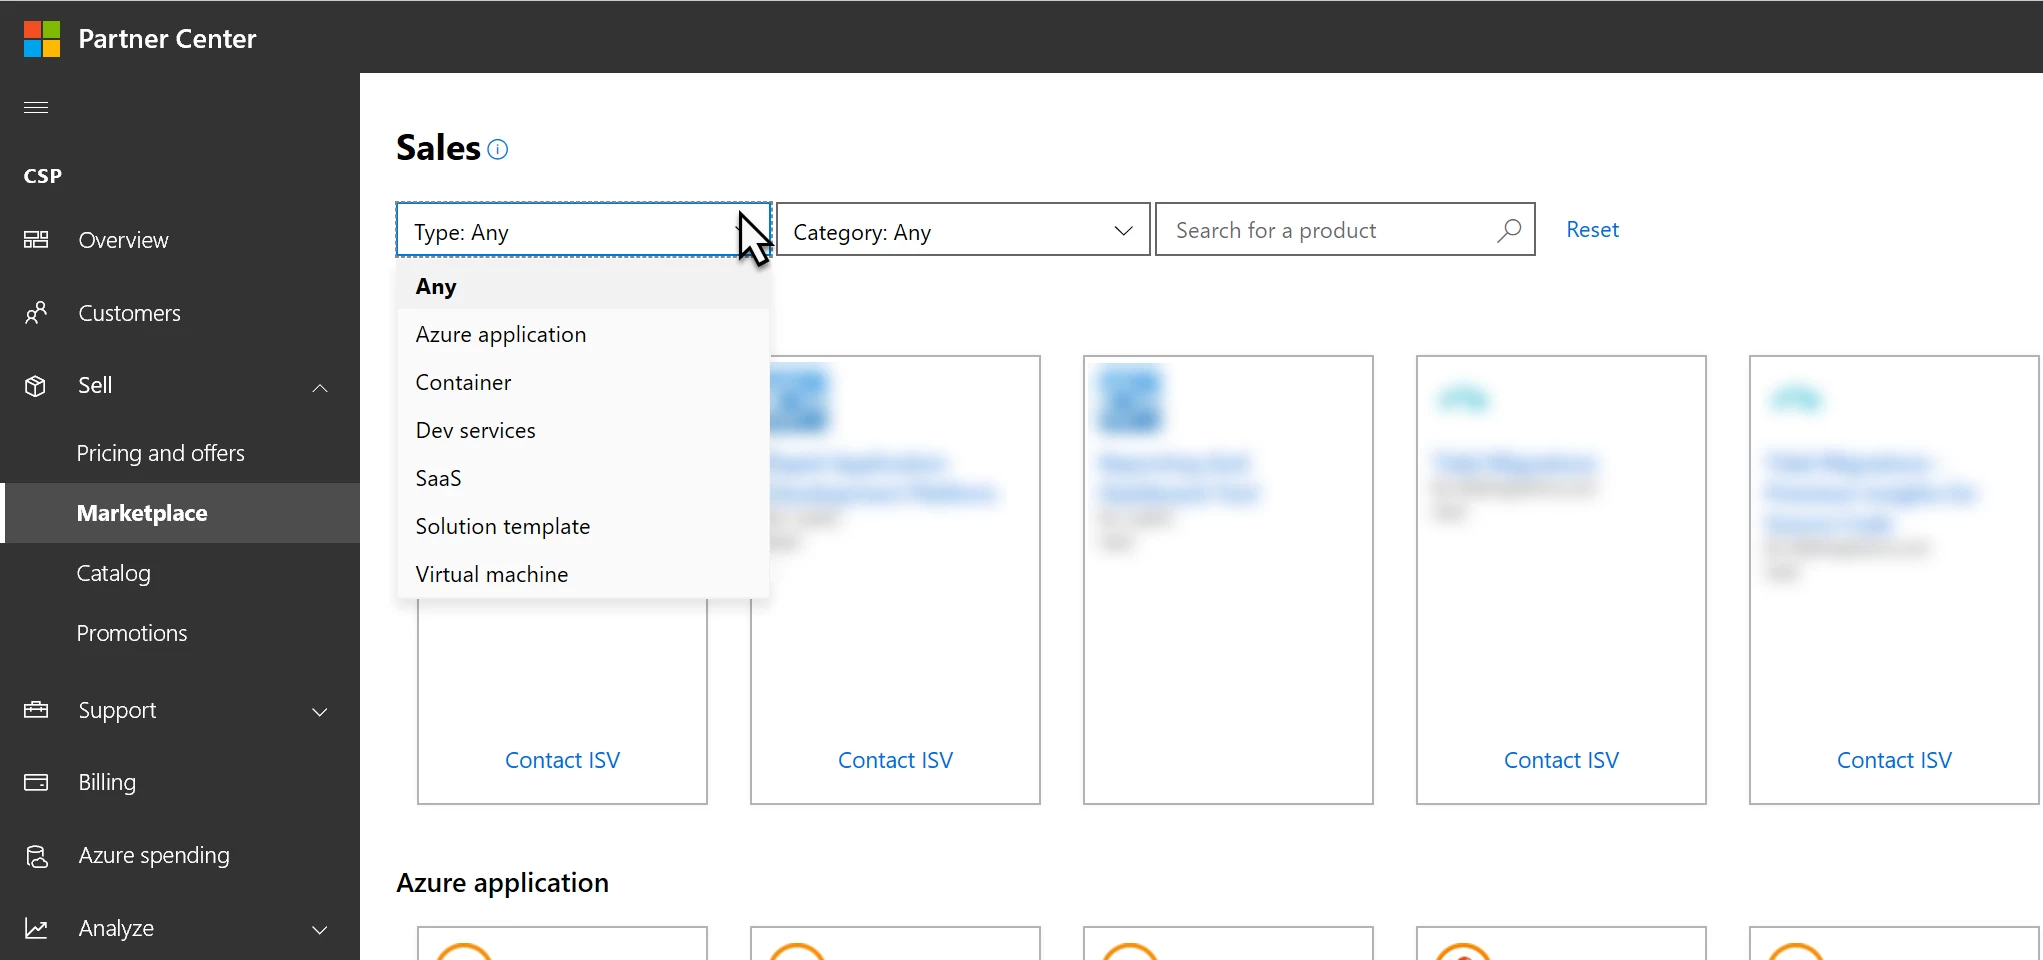 Screenshot of new Marketplace discovery experience in Partner Center under the â€œSellâ€ navigation pane